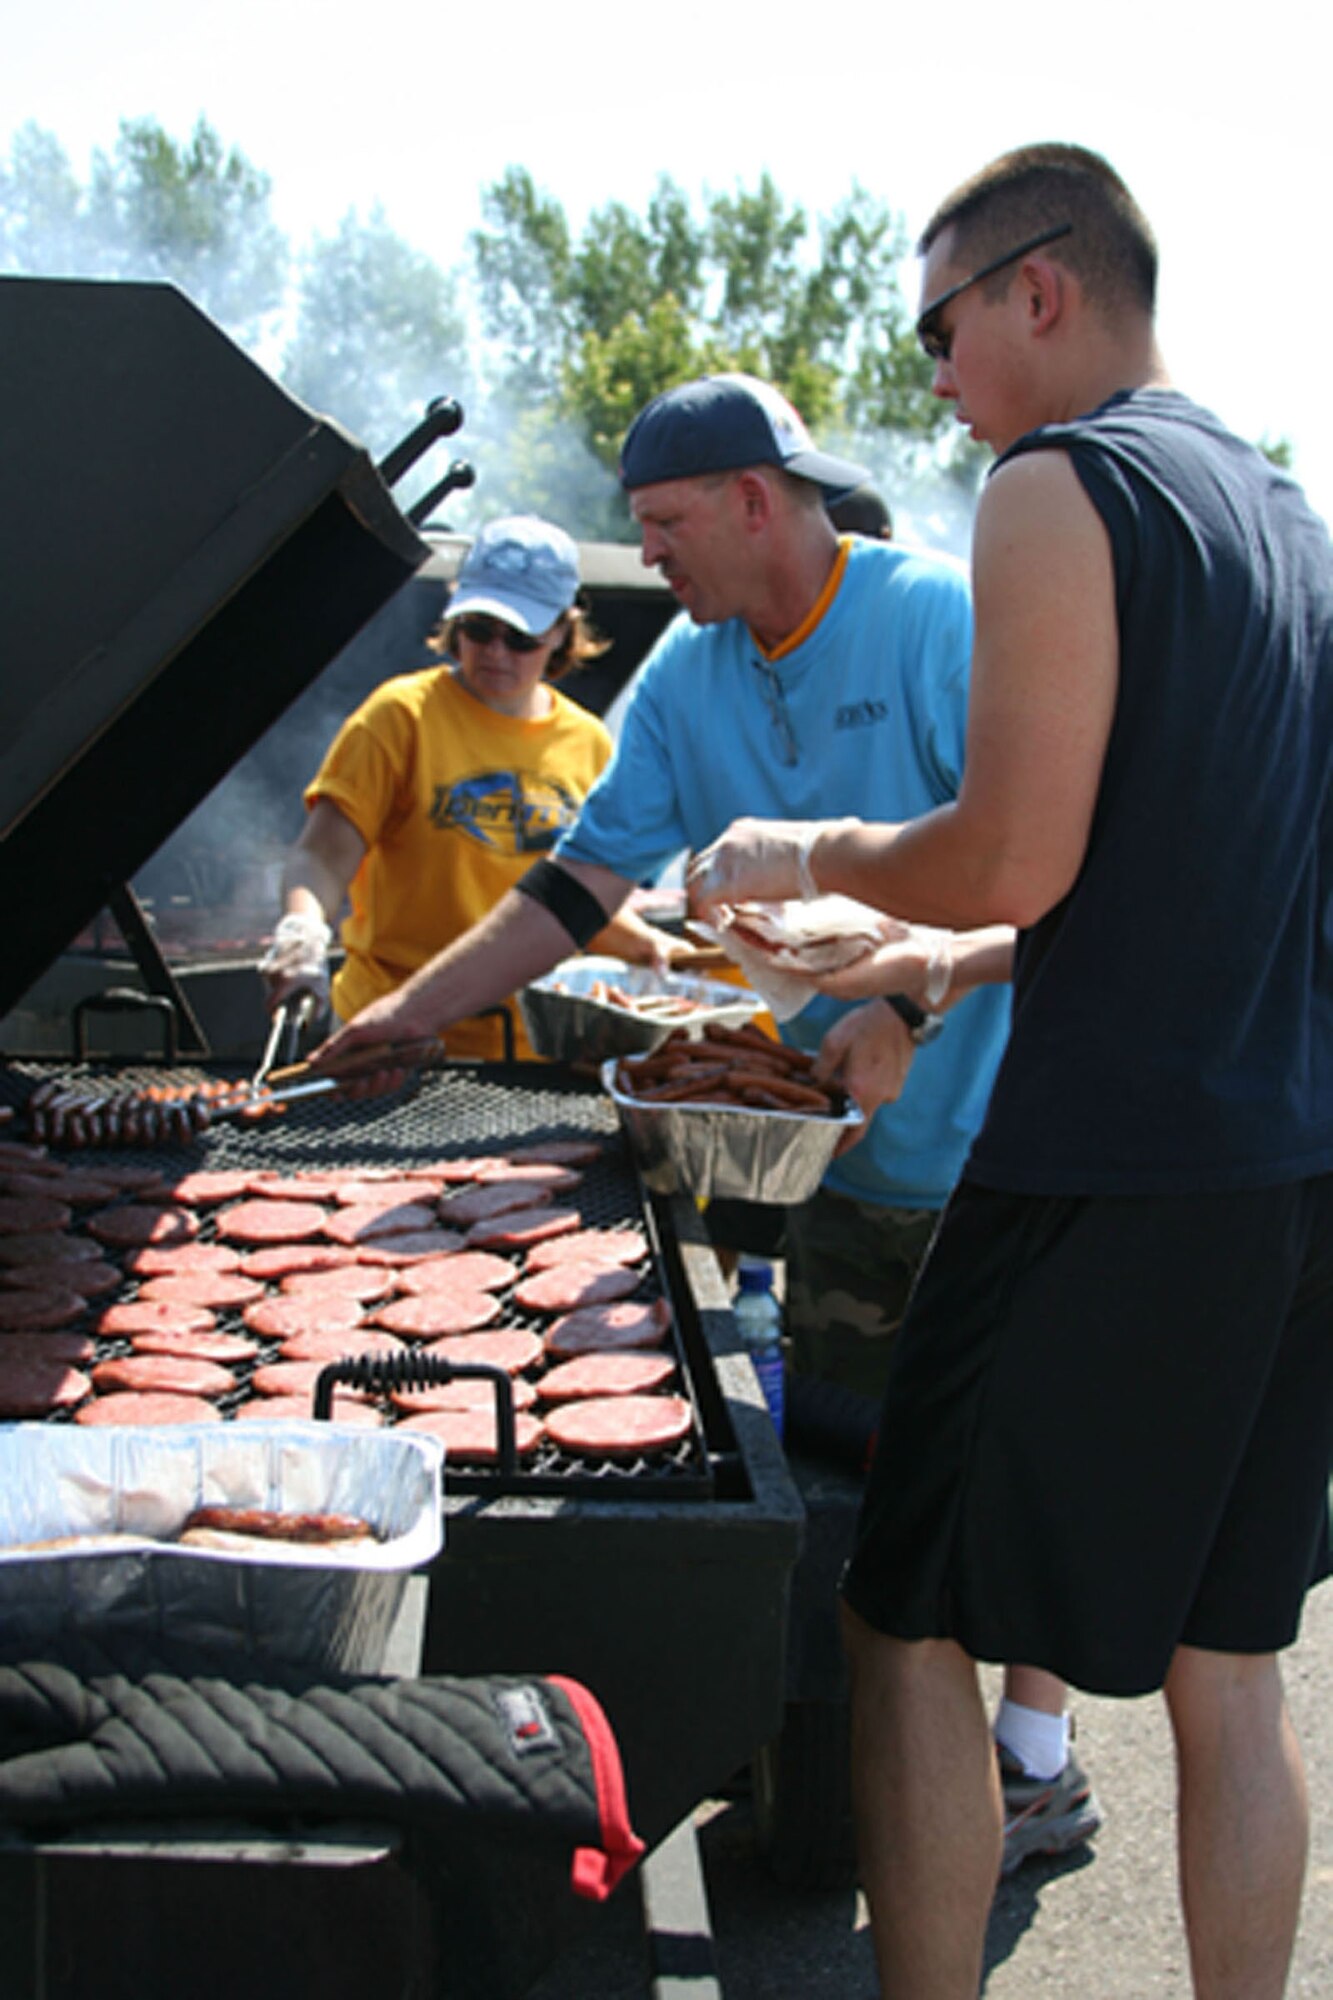 Master Sgts. Carmen Kubiak, 341st Services Squadron and Rick King, 341st Operations Group, work along side Senior Airman Neil Young, 341st Missile Maintenance Squadron, manning the hamburger grill during the "Cruisin' the Summer" base picnic July 27. (U.S. Air Force photo/Senior Airman Eydie Sakura).